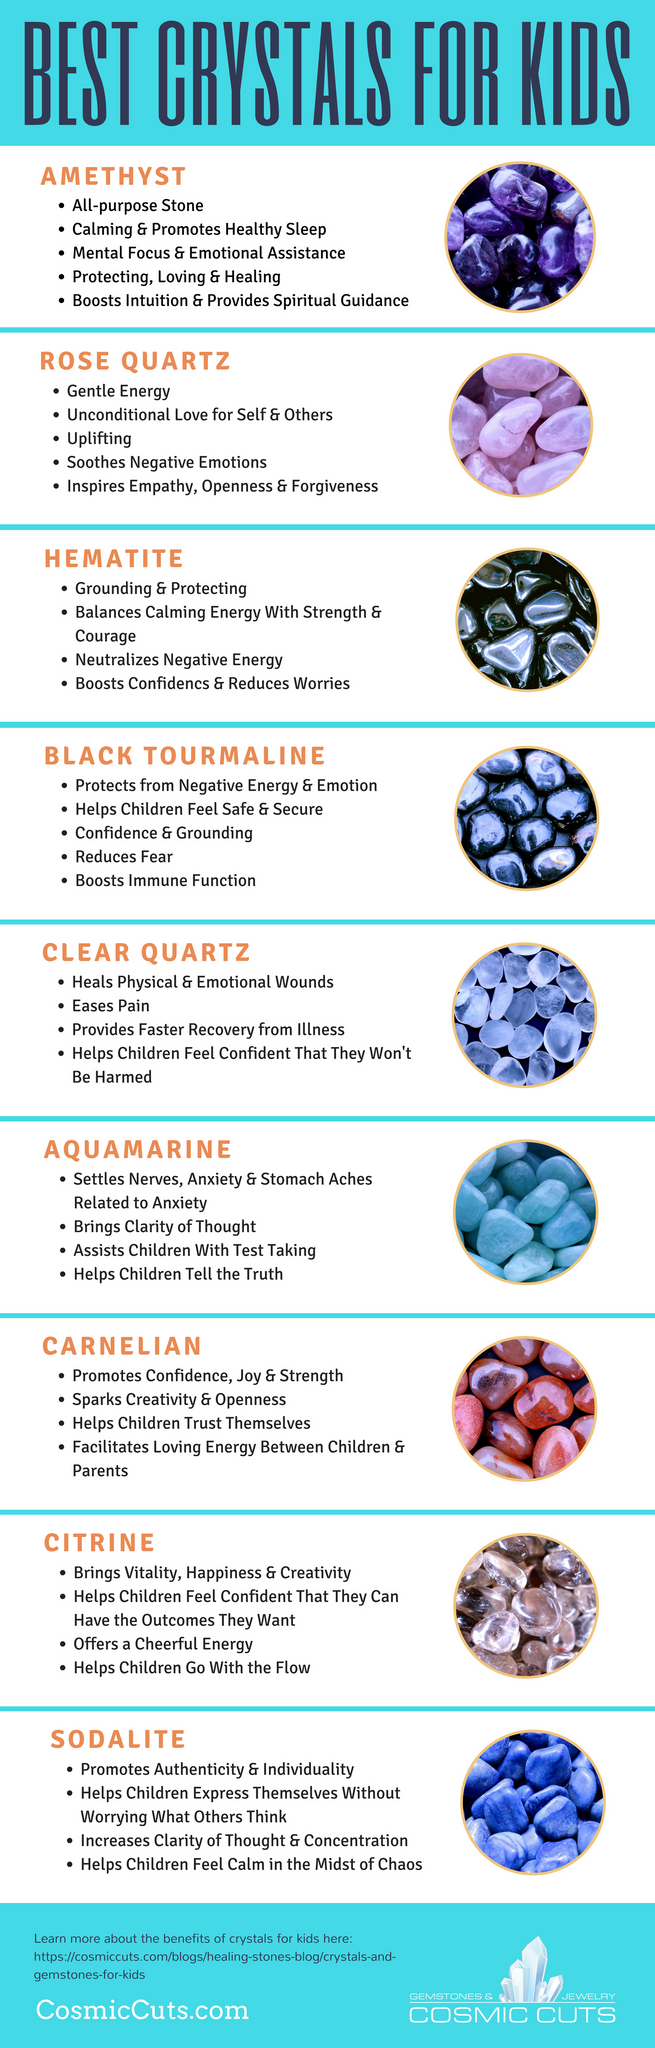 Best Crystals for Kids Infographic